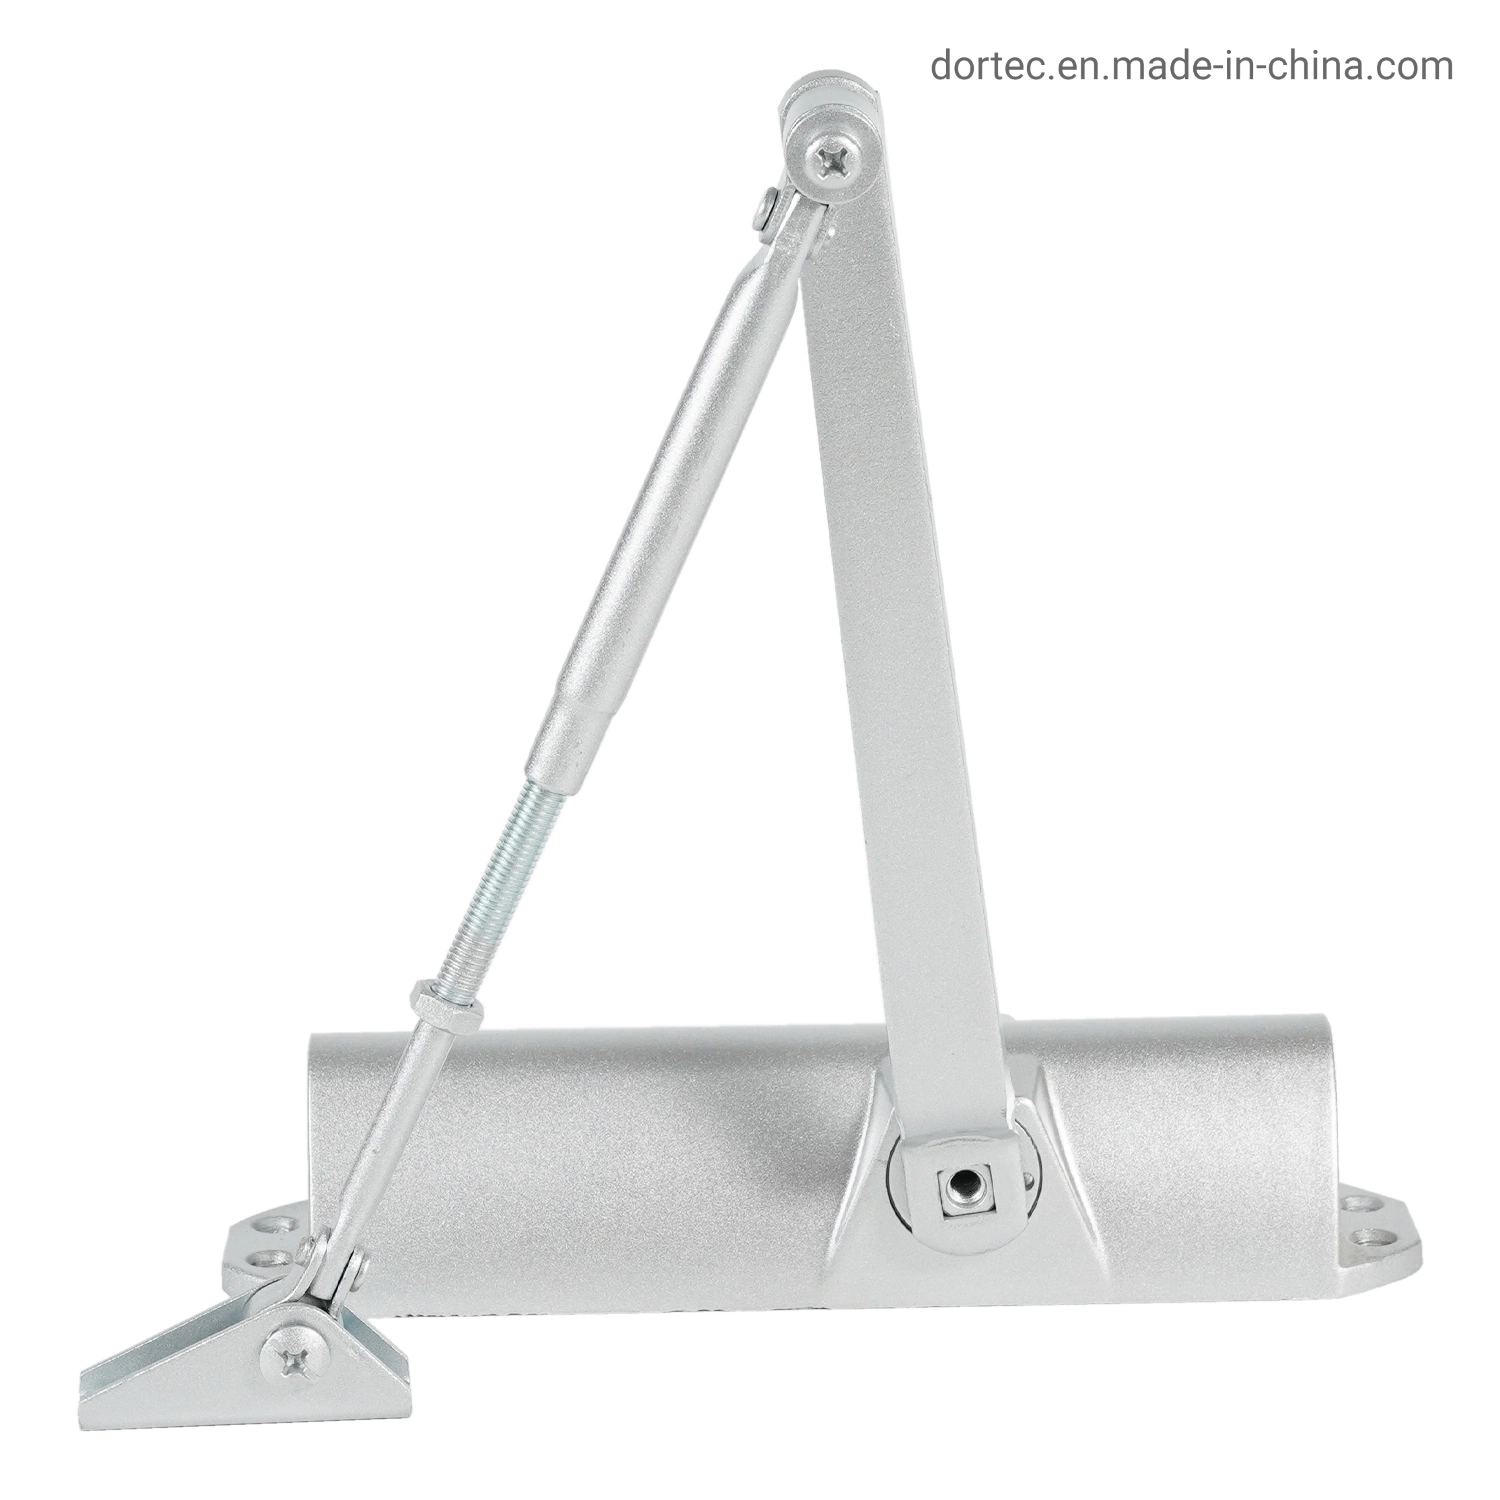 Best Residental Door Closer Home Hardware Manufacture in China